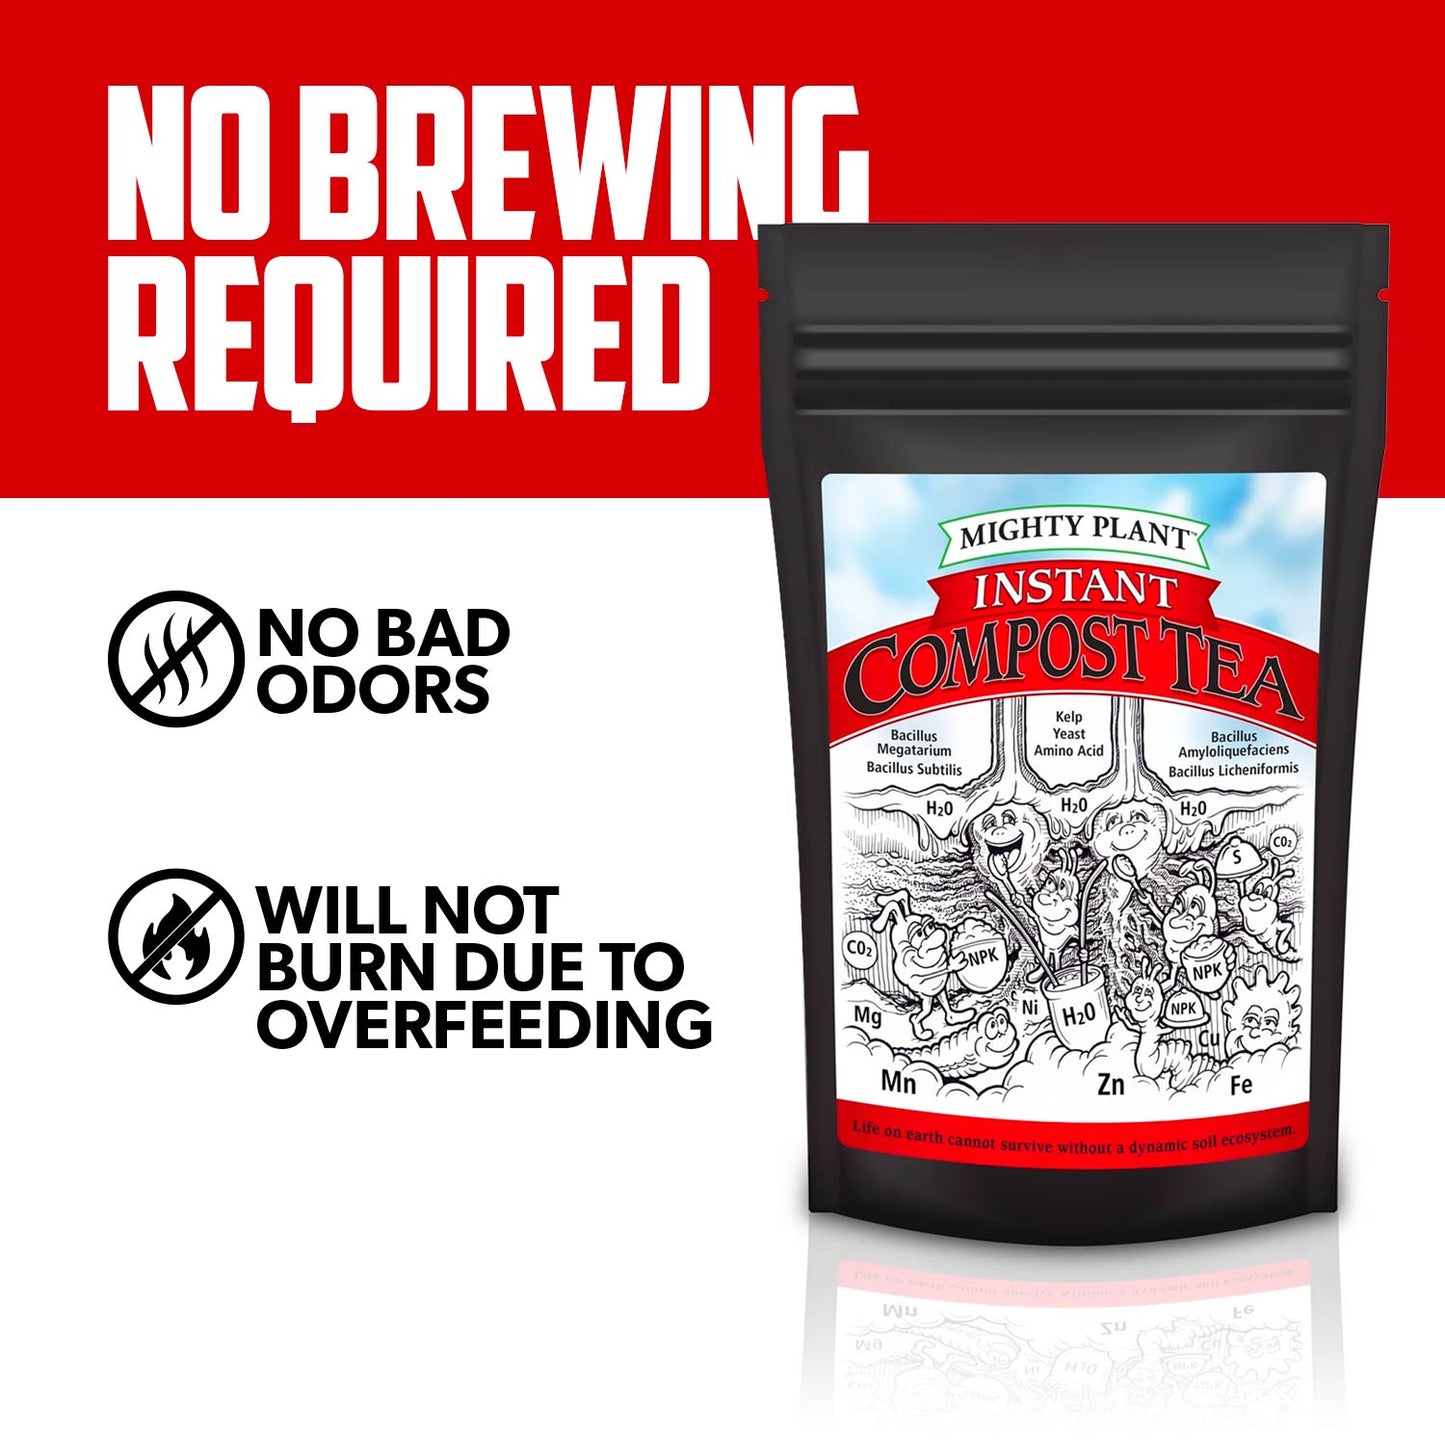 Instant Compost Tea graphic saying no brewing required